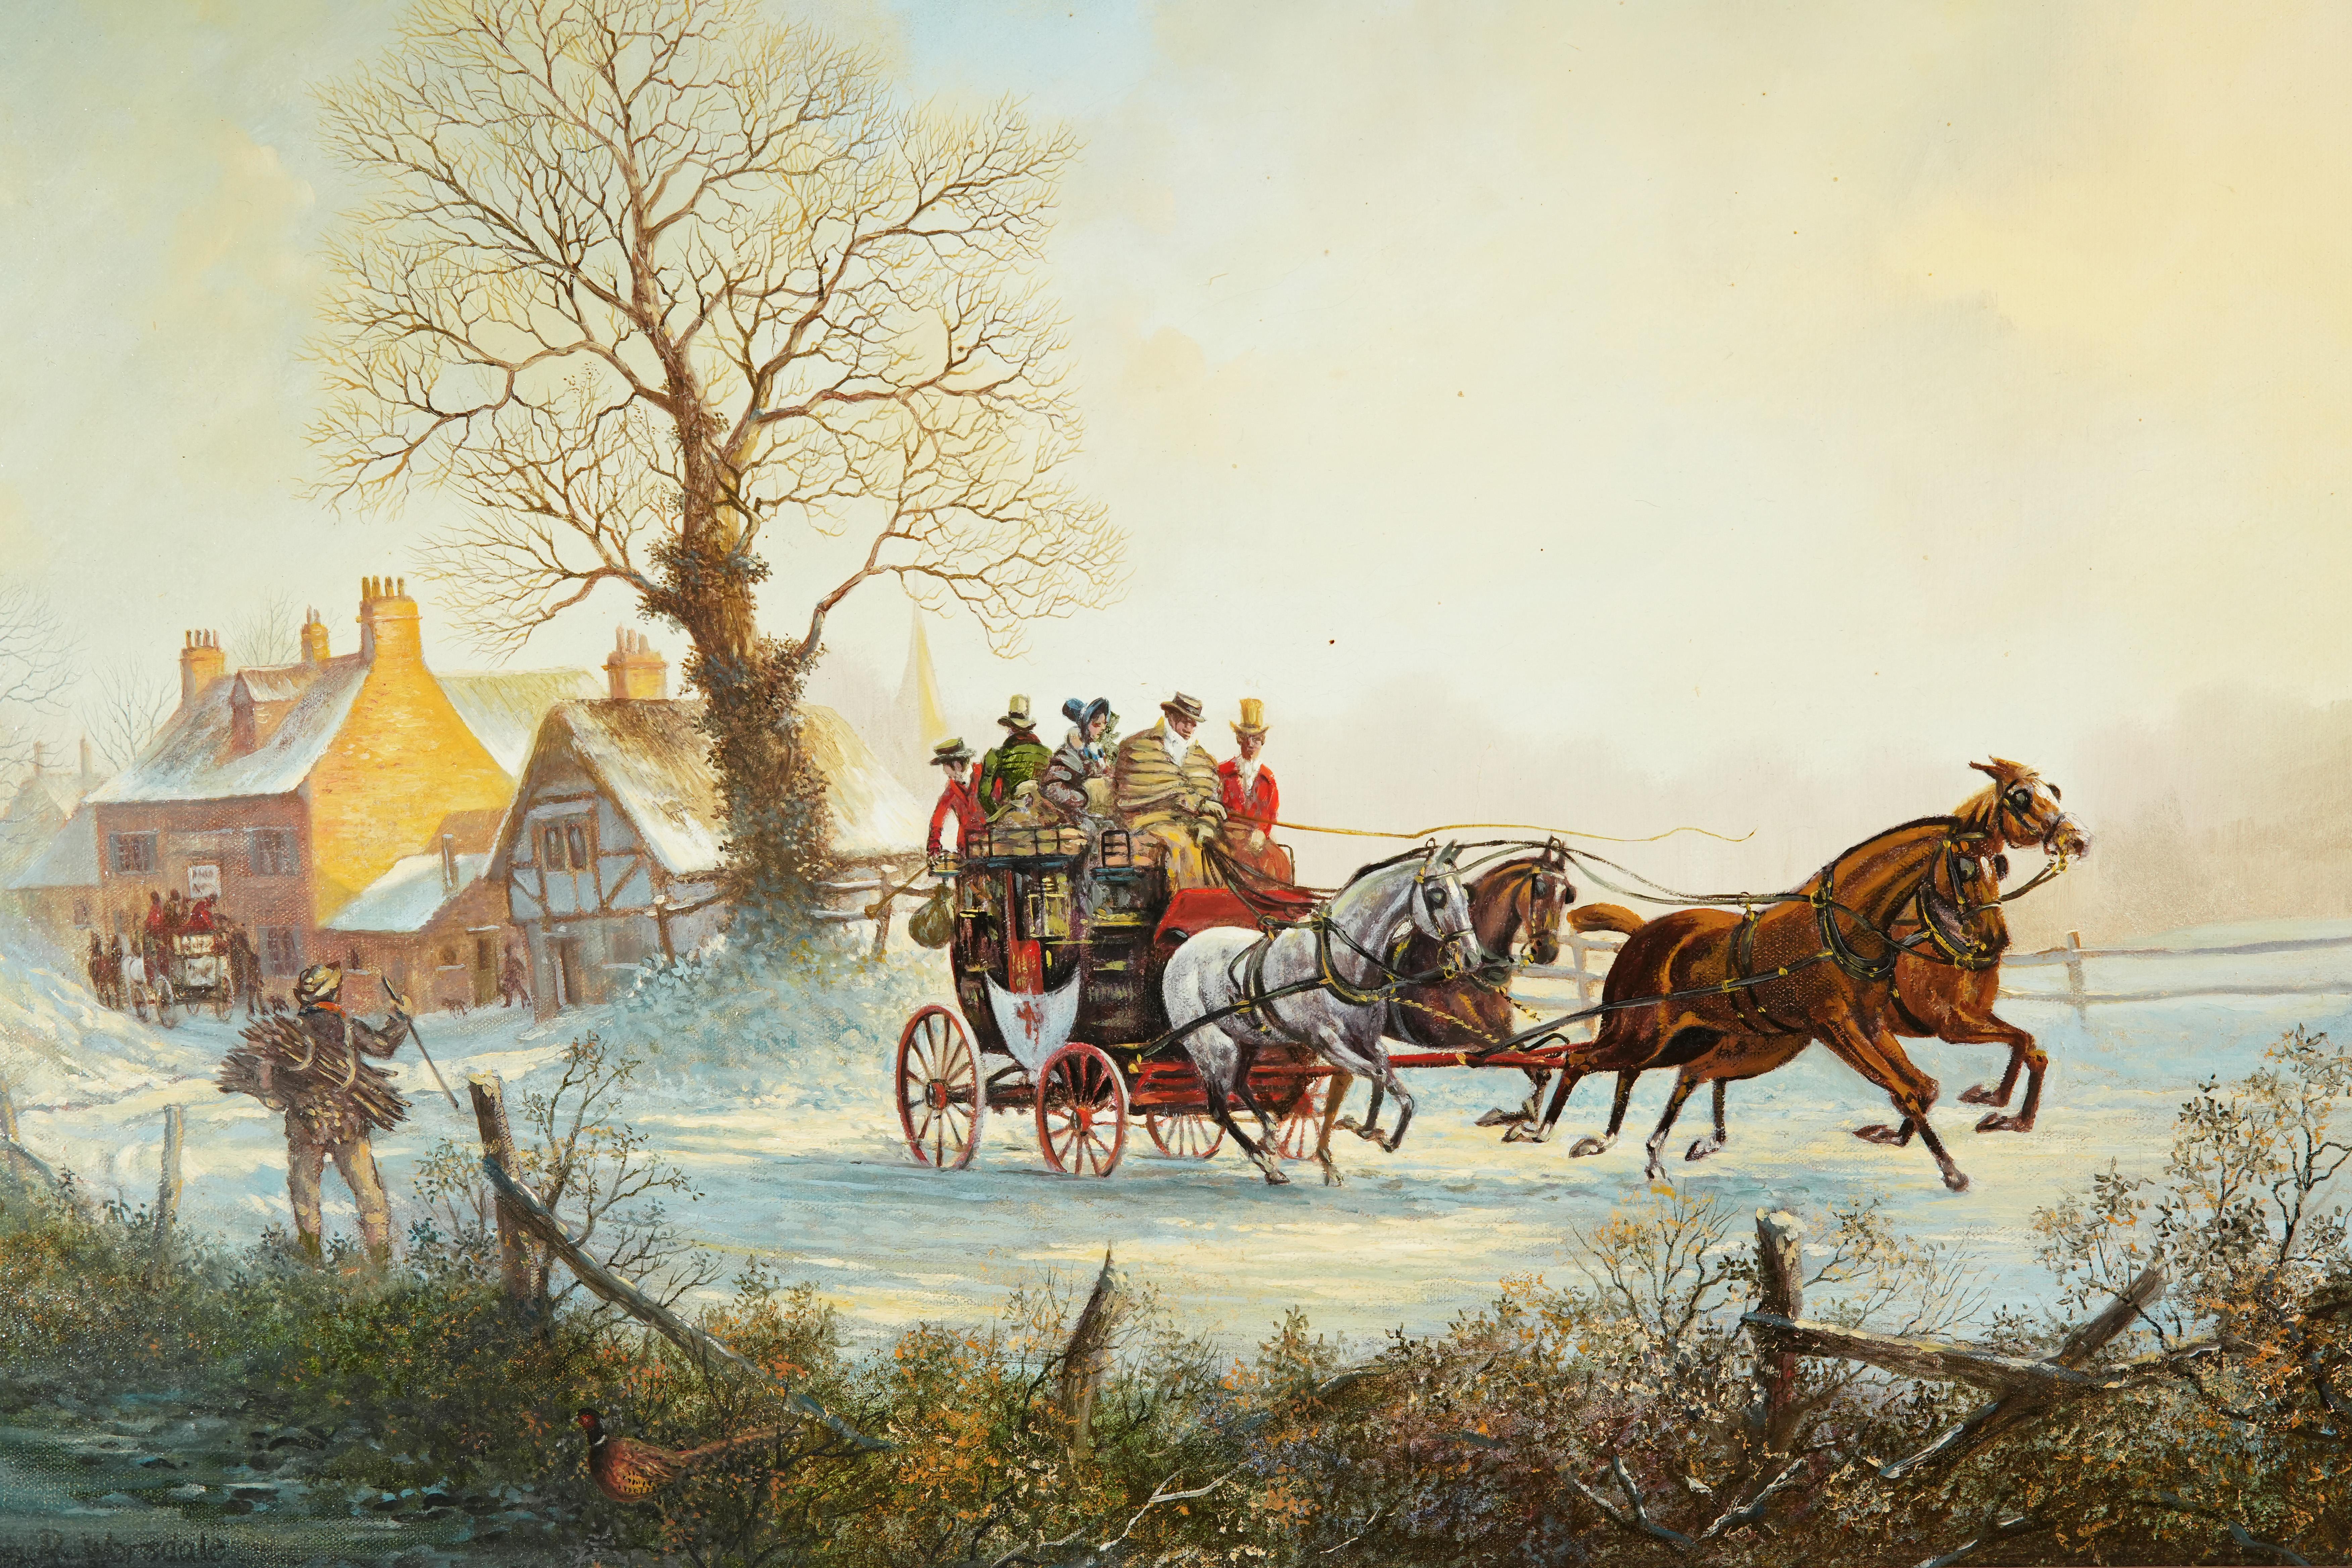 A fine antique oil painting of horses pulling a stagecoach in snow , by John richard Worsdale (1869-1947)
The artist portrays this powerful scene with an extensive view, featuring the stagecoach pulled by 4 horses 
and a village scene behind with